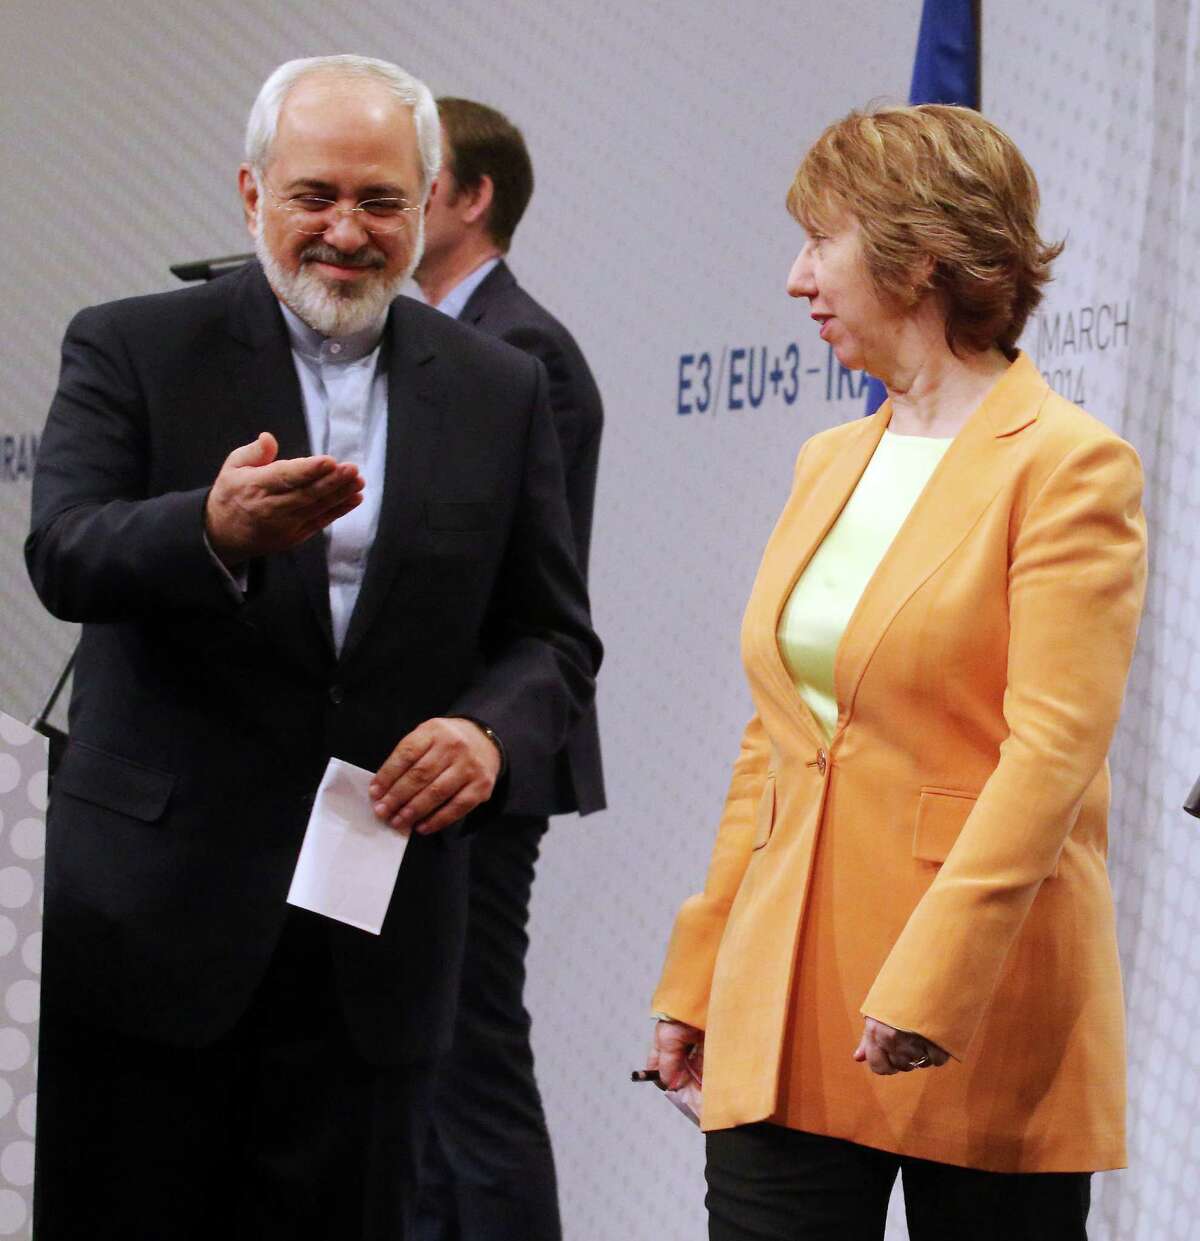 European foreign policy chief Catherine Ashton, left, and Iranian Foreign Minister Mohamad Javad Zarif, right, leave a news conference after closed-door nuclear talks in Vienna, Austria, Wednesday, March 19, 2014. They said the talks addressed Iran's uranium enrichment program, a nearly finished nuclear reactor and the lifting of sanctions on Iran that have been imposed successively over the past decade as Tehran expanded its atomic activities. The talks will resume April 7 in Vienna. (AP Photo/Ronald Zak)